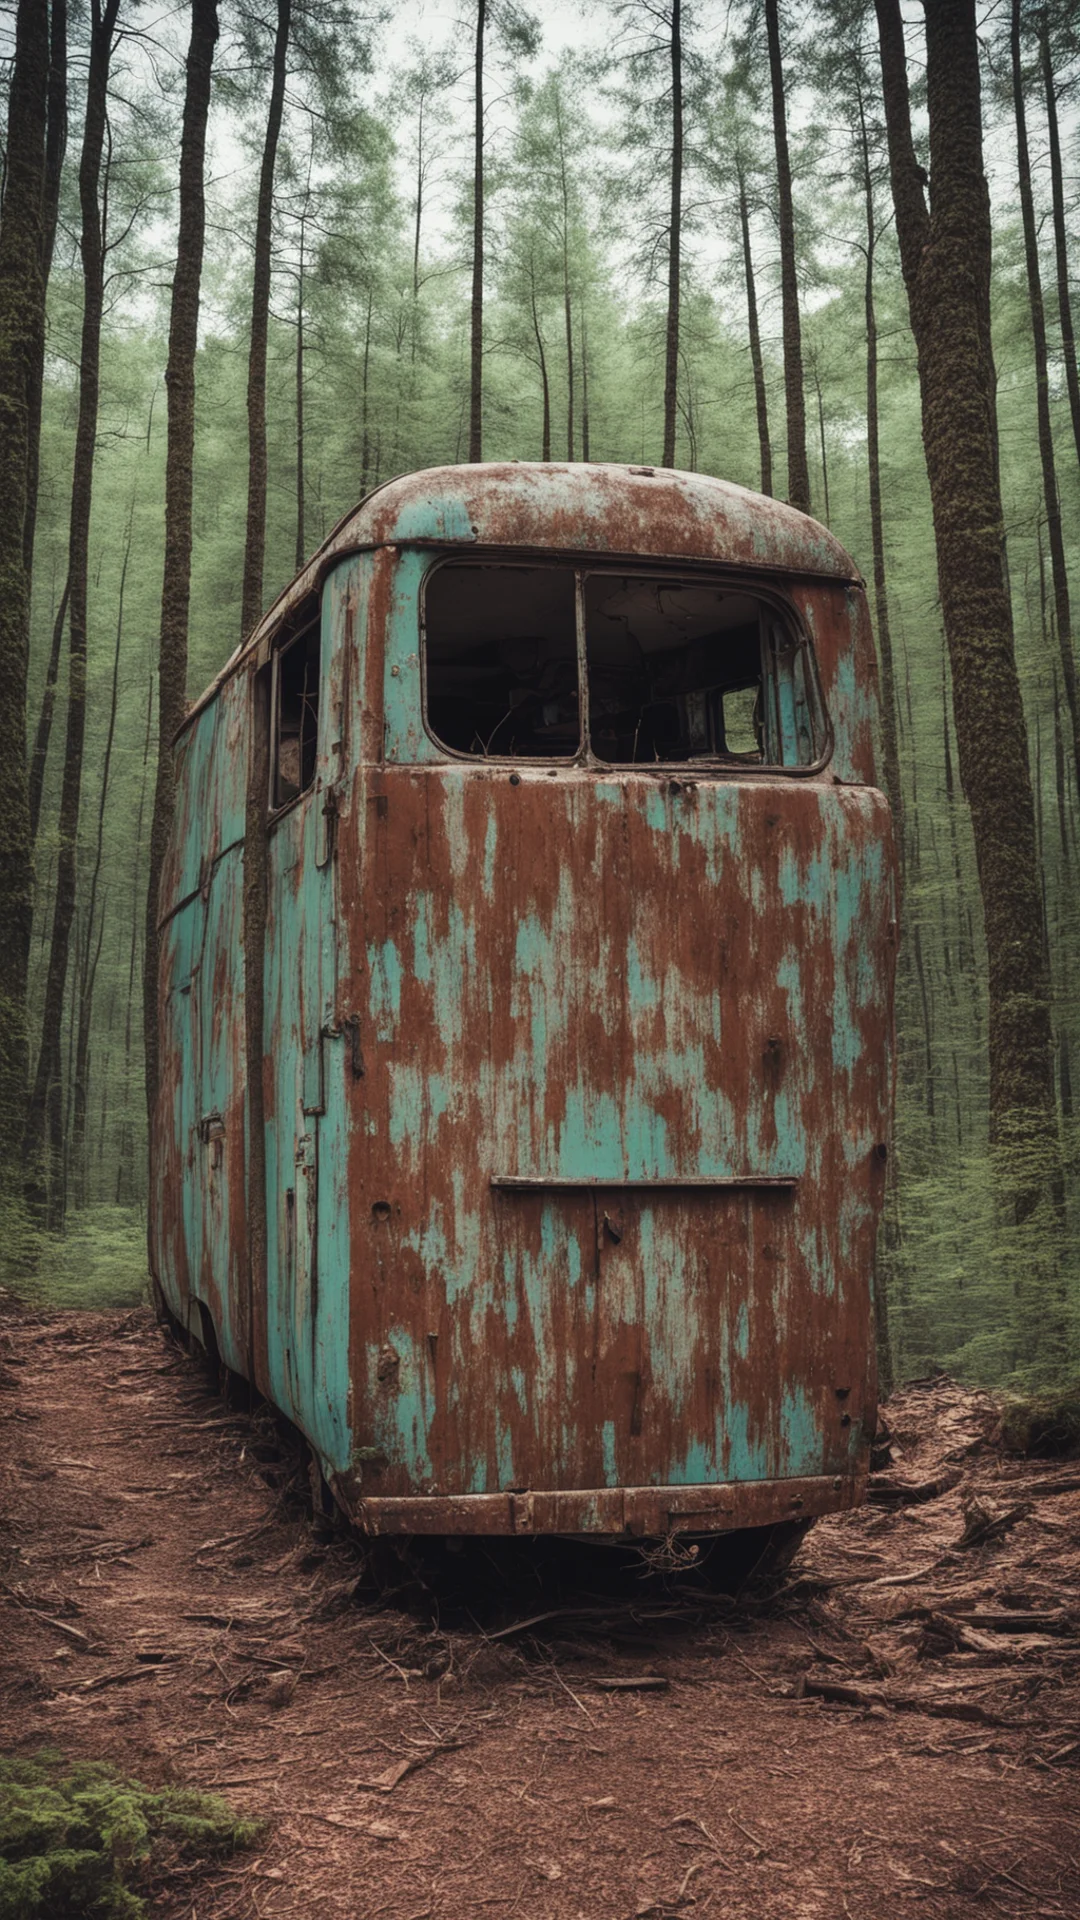 close up shot of abandoned 80s trailer van in the woods junk rusty corroded vintage wide angle day time atmospheric wint confident engaging wow artstation art 3 tall